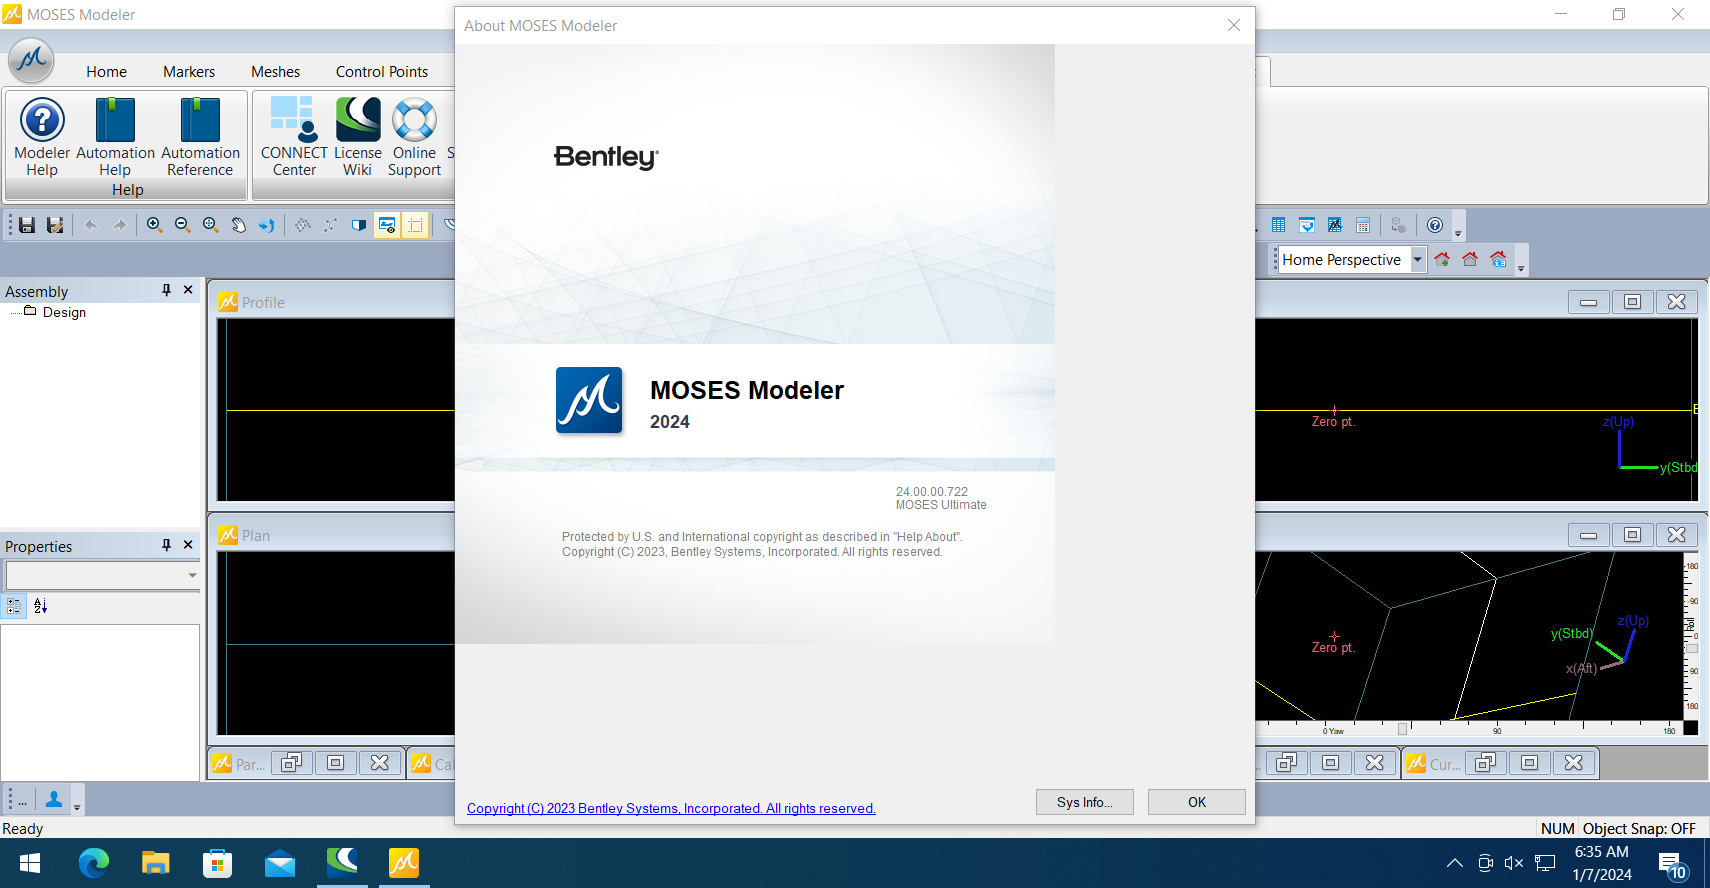 Working with Bentley MOSES 2024 v24.00.00.722 x64 full license